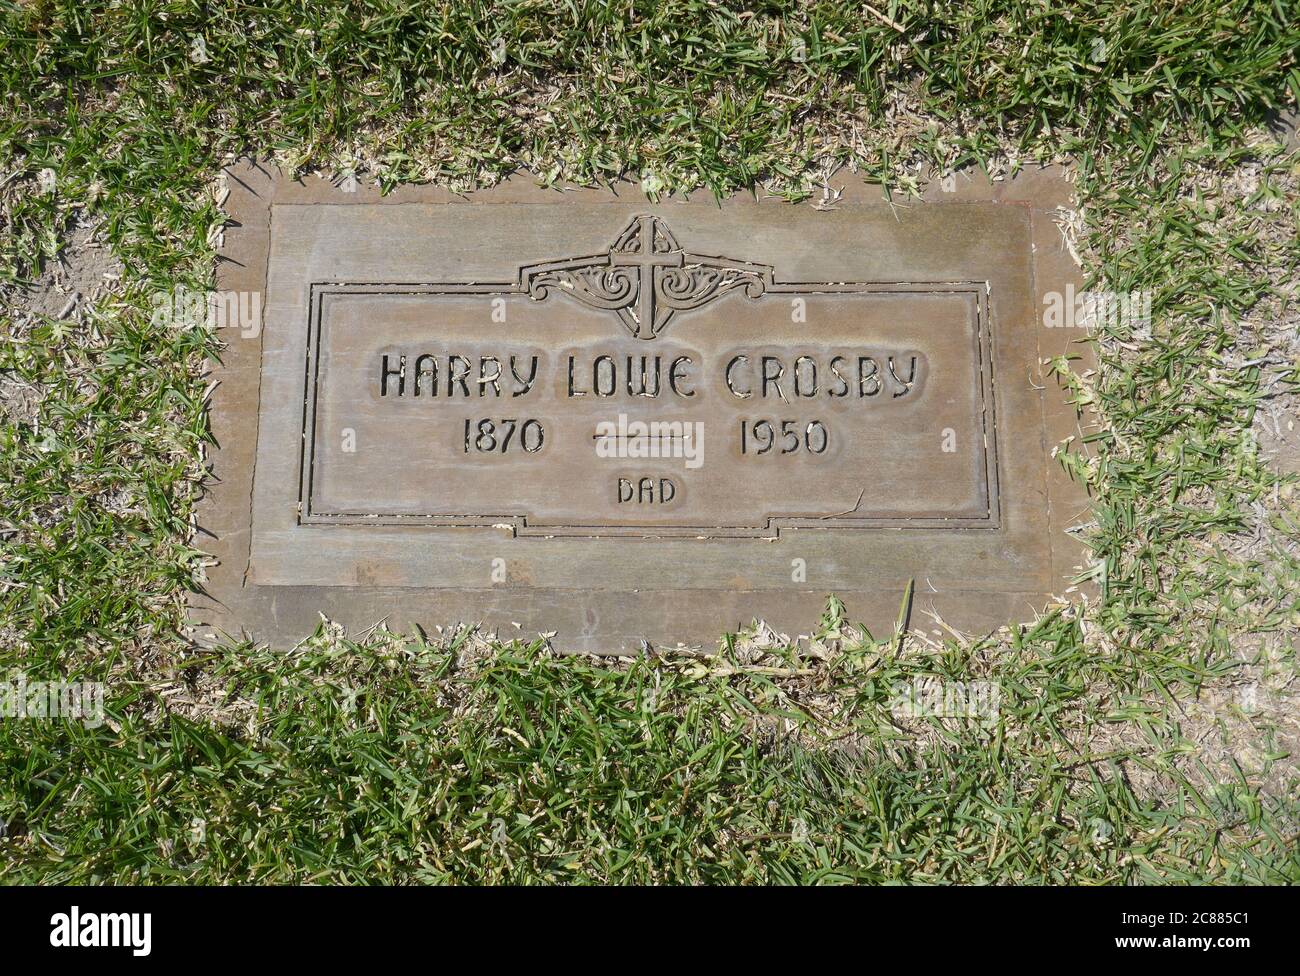 Culver City, California, USA 21st July 2020 A general view of atmosphere of Harry Louie Crosby's Grave in Grotto Section at Holy Cross Cemetery on July 21, 2020 in Culver City, California, USA. Photo by Barry King/Alamy Stock Photo Stock Photo